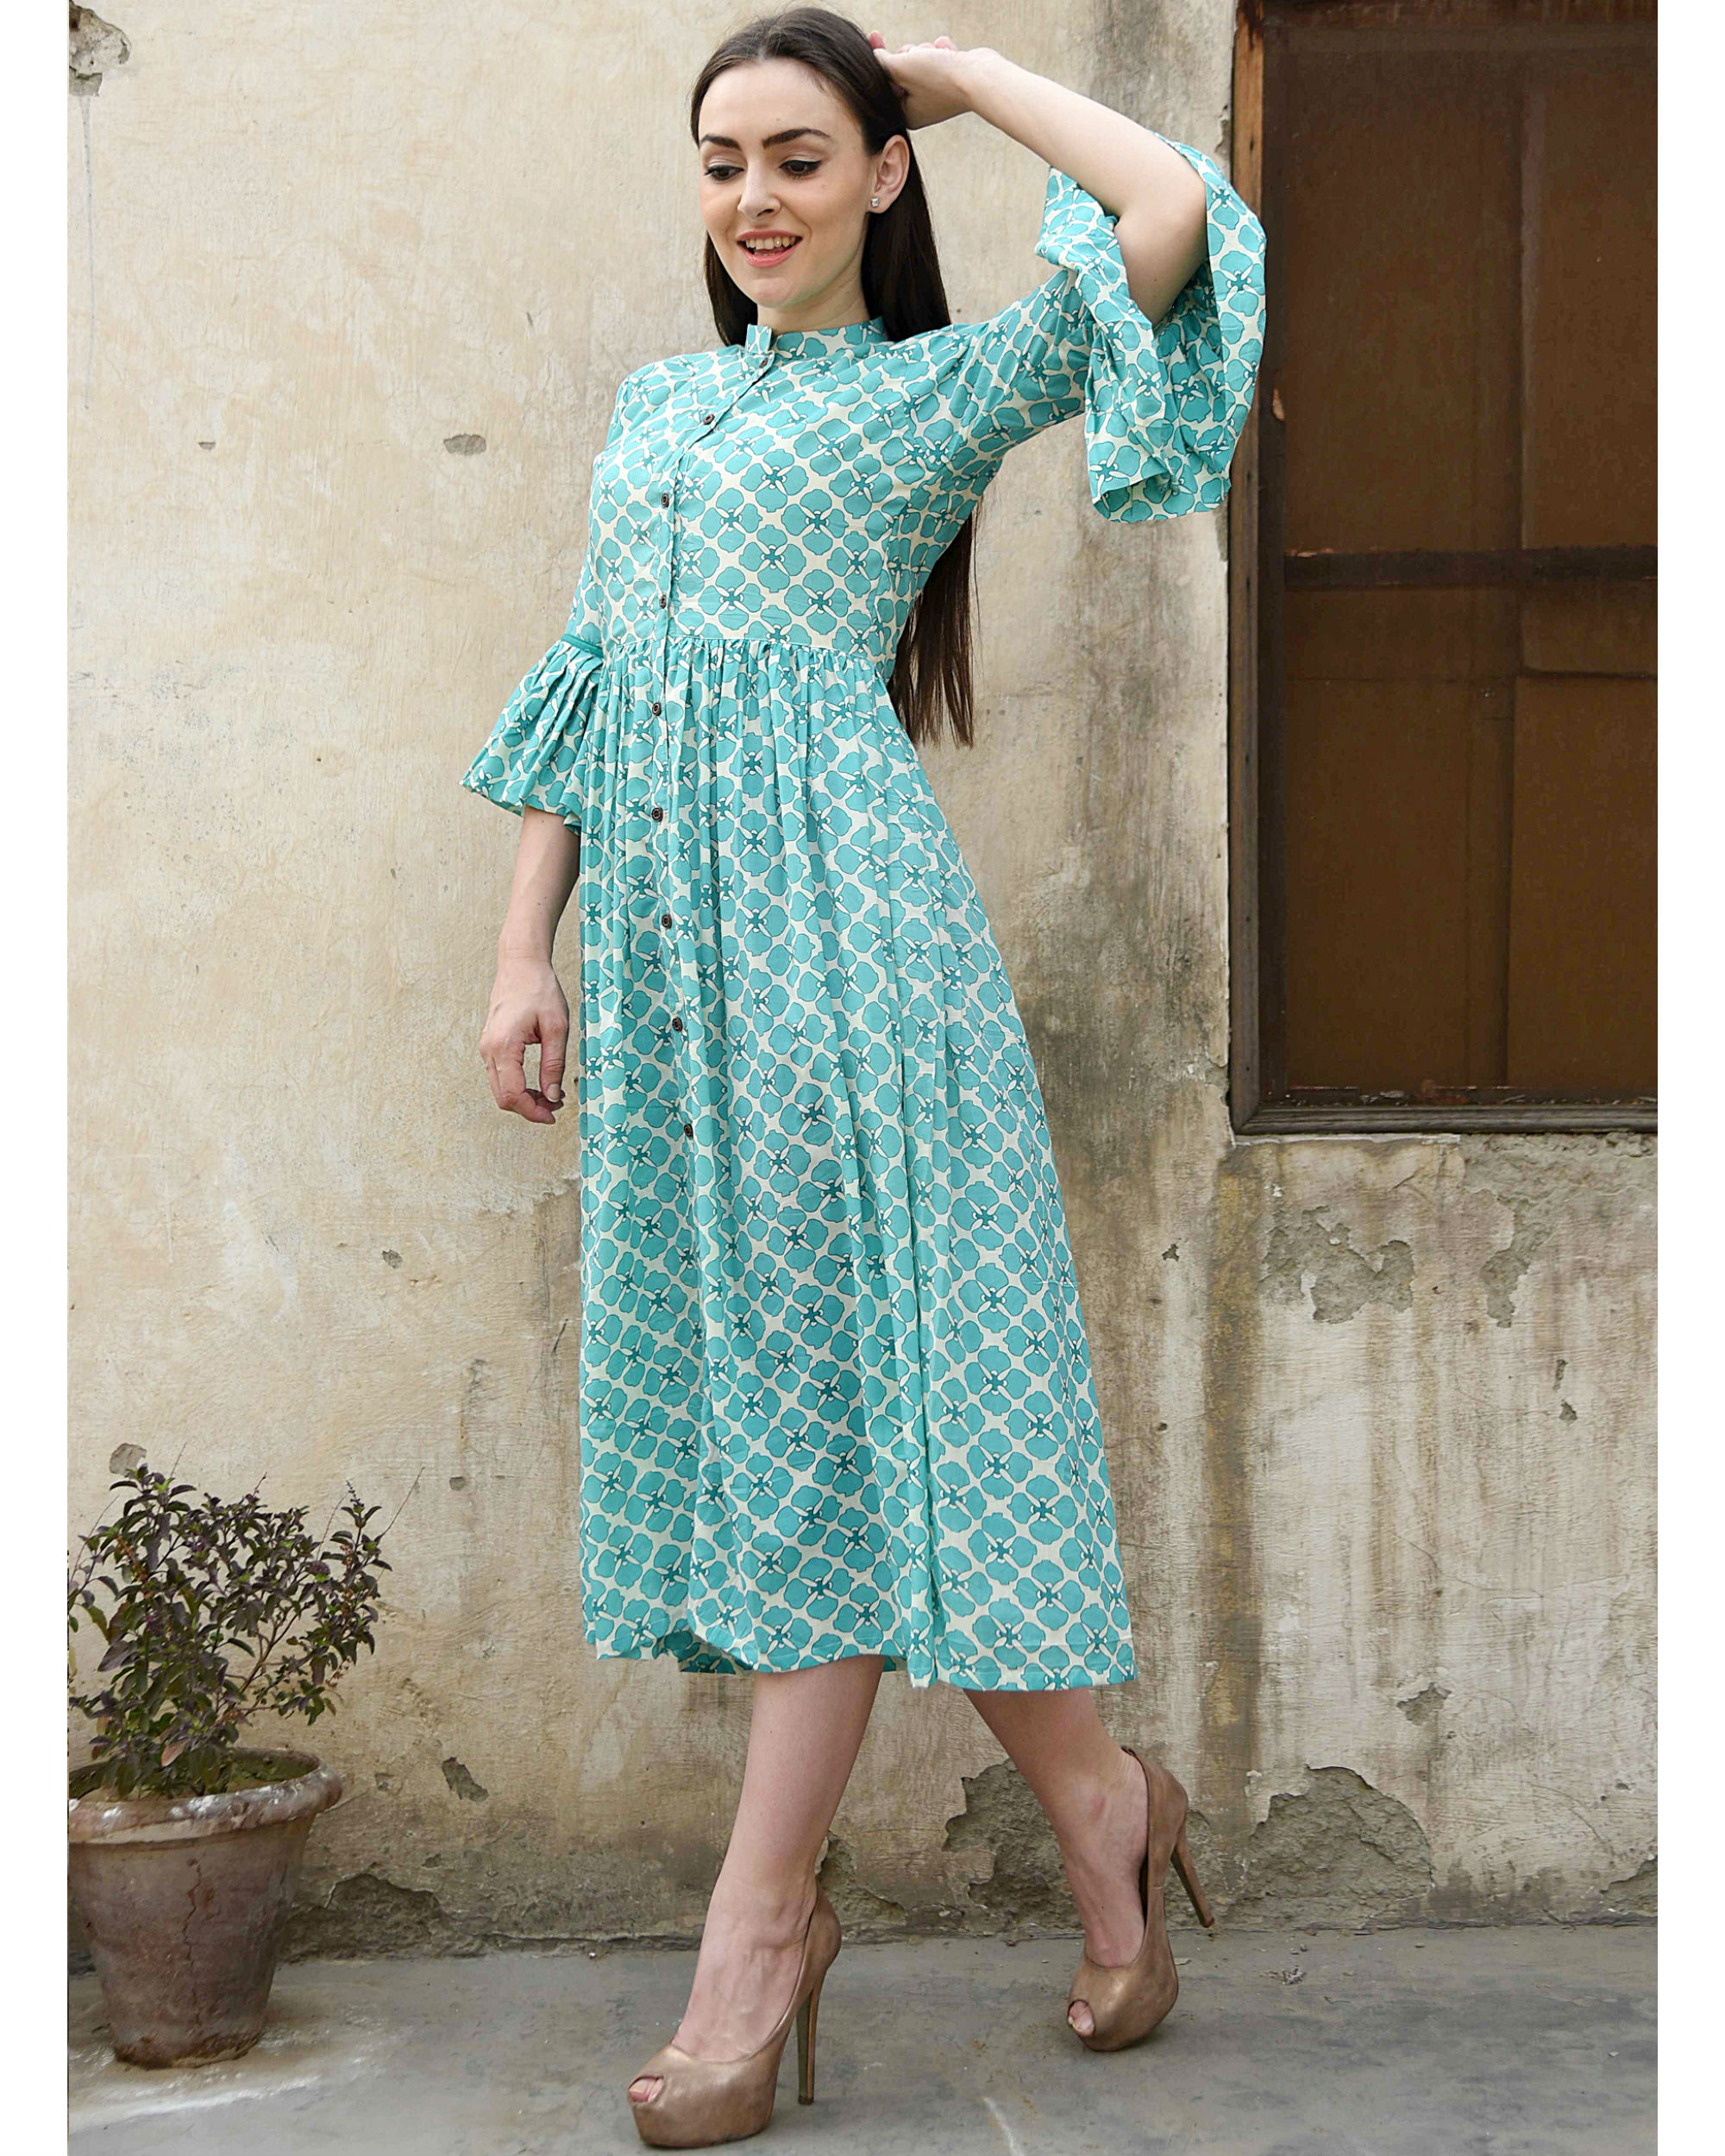 Turquoise bell sleeves dress by Desi Doree | The Secret Label